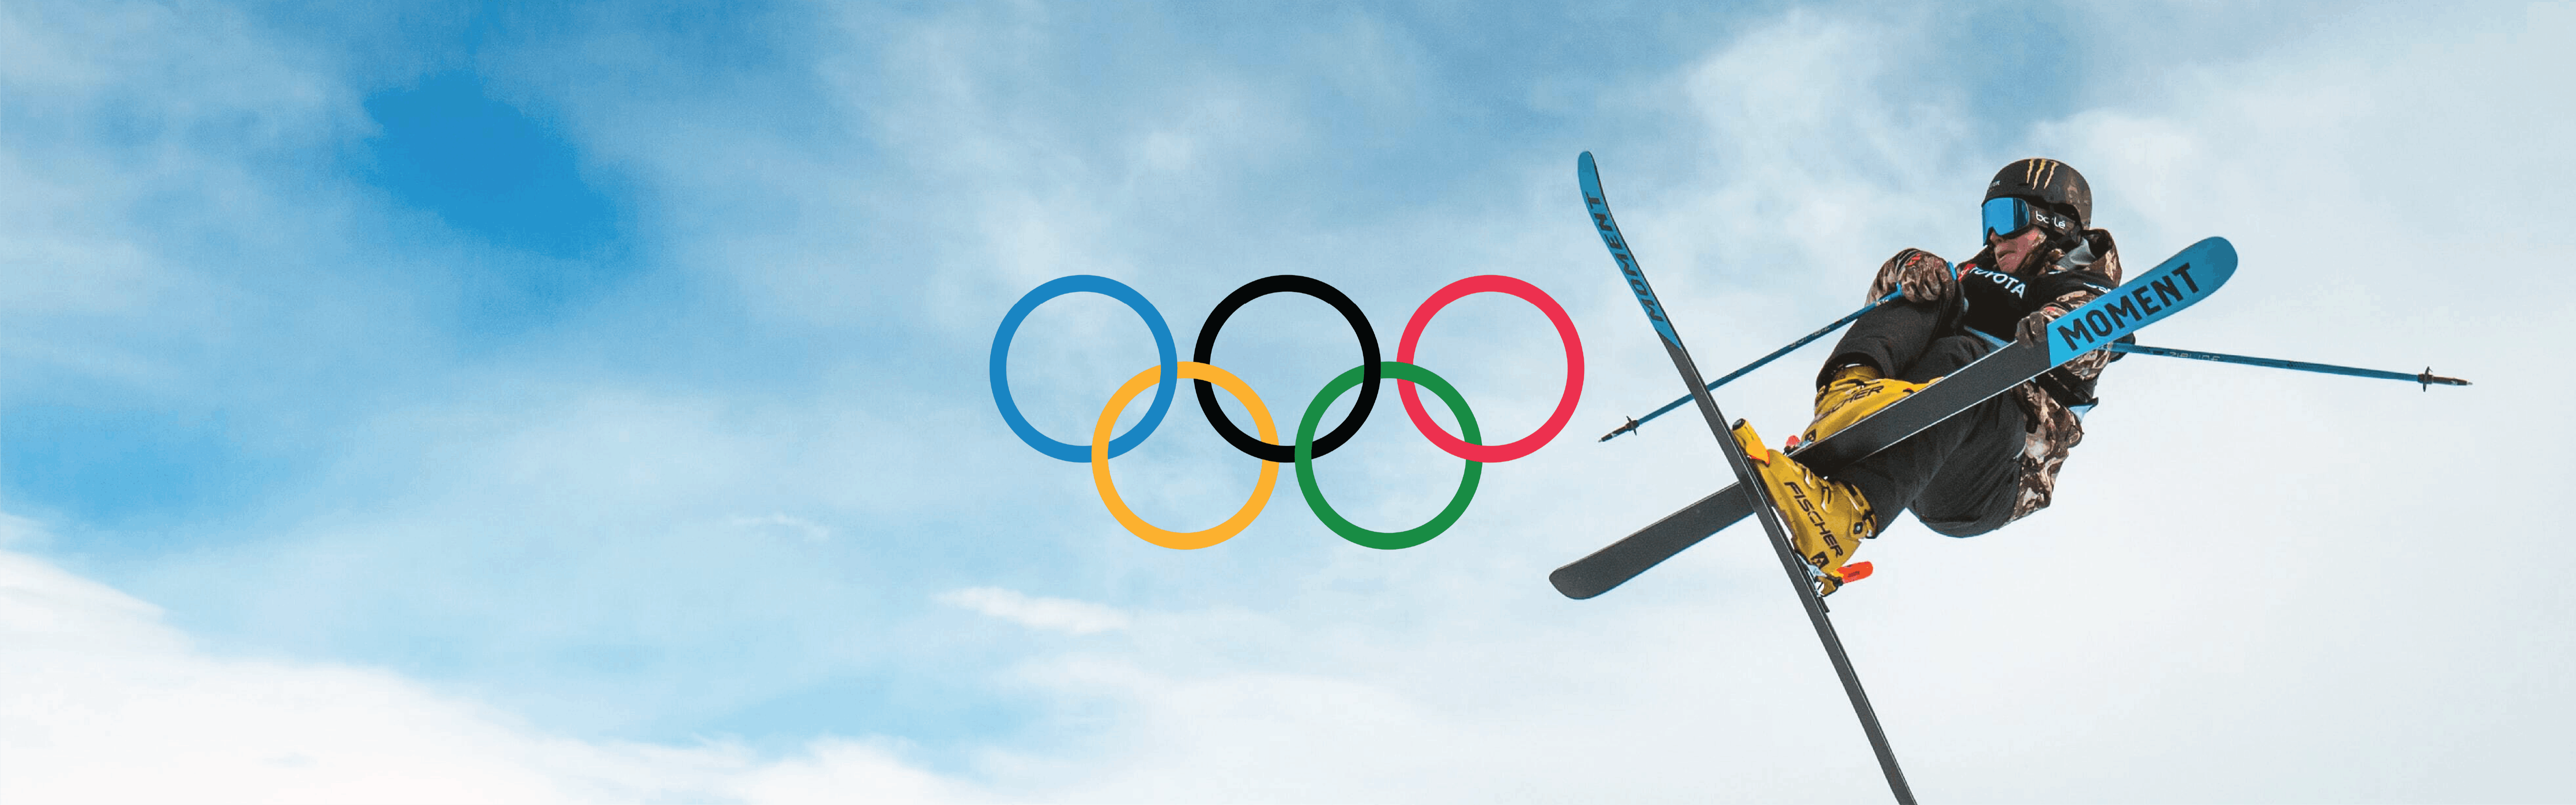 A skier jumps in the air and crosses his skis. The sky behind him is blue and dusted with clouds. The Olympic rings are added on top.